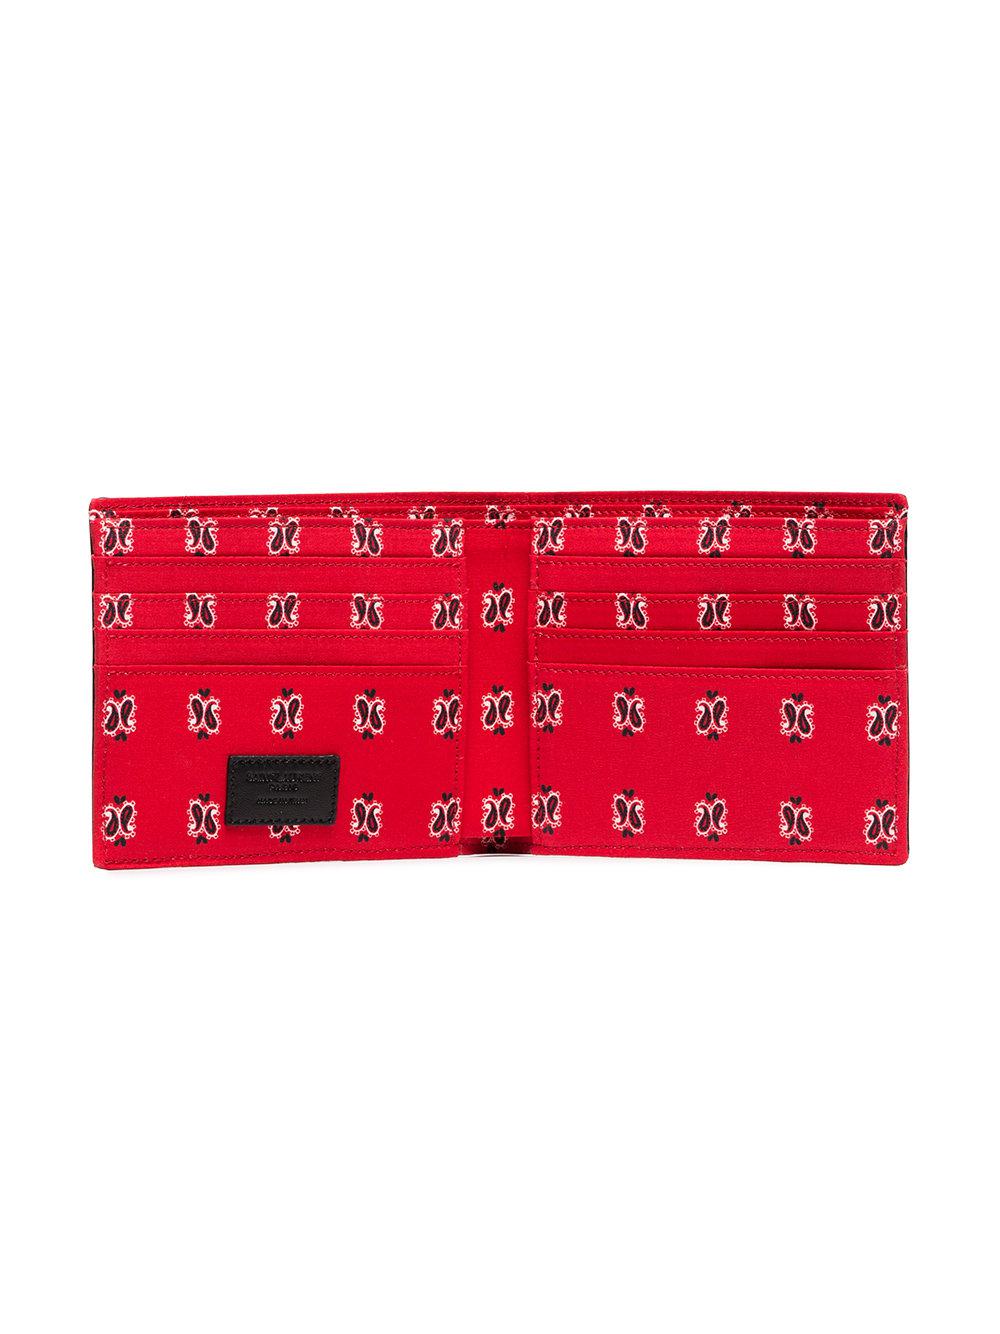 Saint Laurent Black And Red Bandana Lined Leather Wallet for Men 